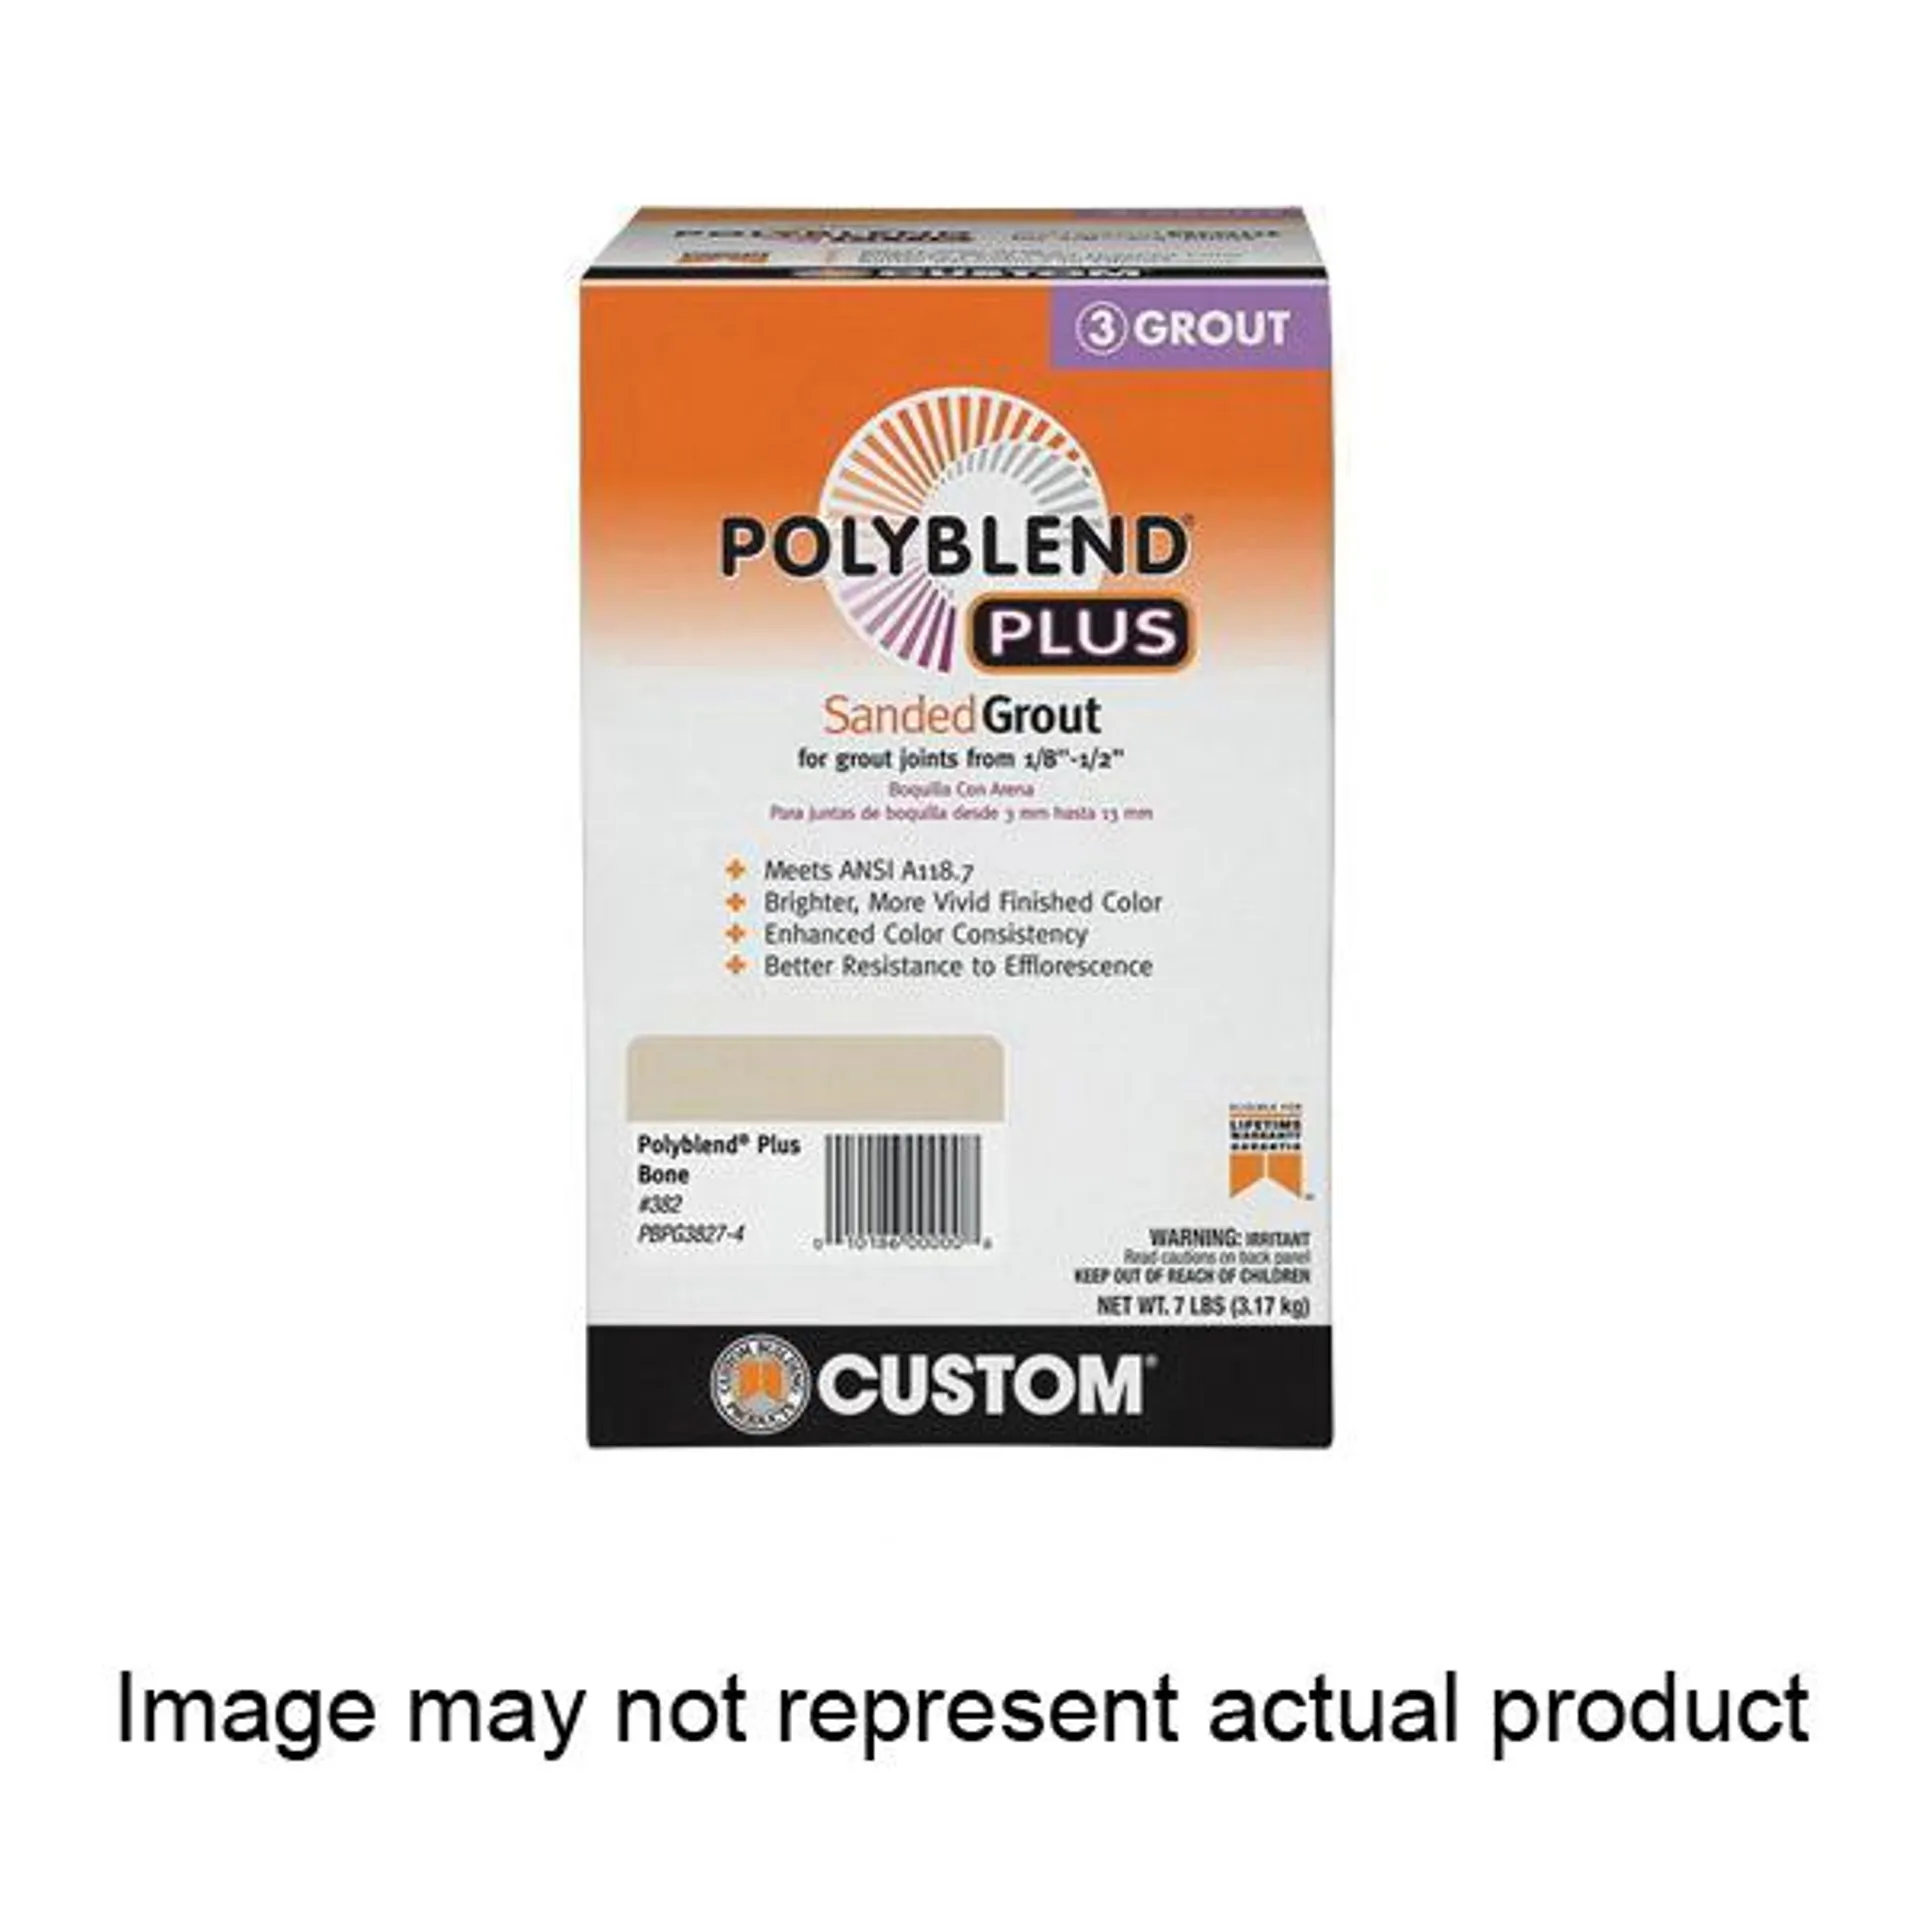 Polyblend Plus PBPG1657-4 Sanded Grout, Solid Powder, Characteristic, Delorean Gray, 7 lb Box